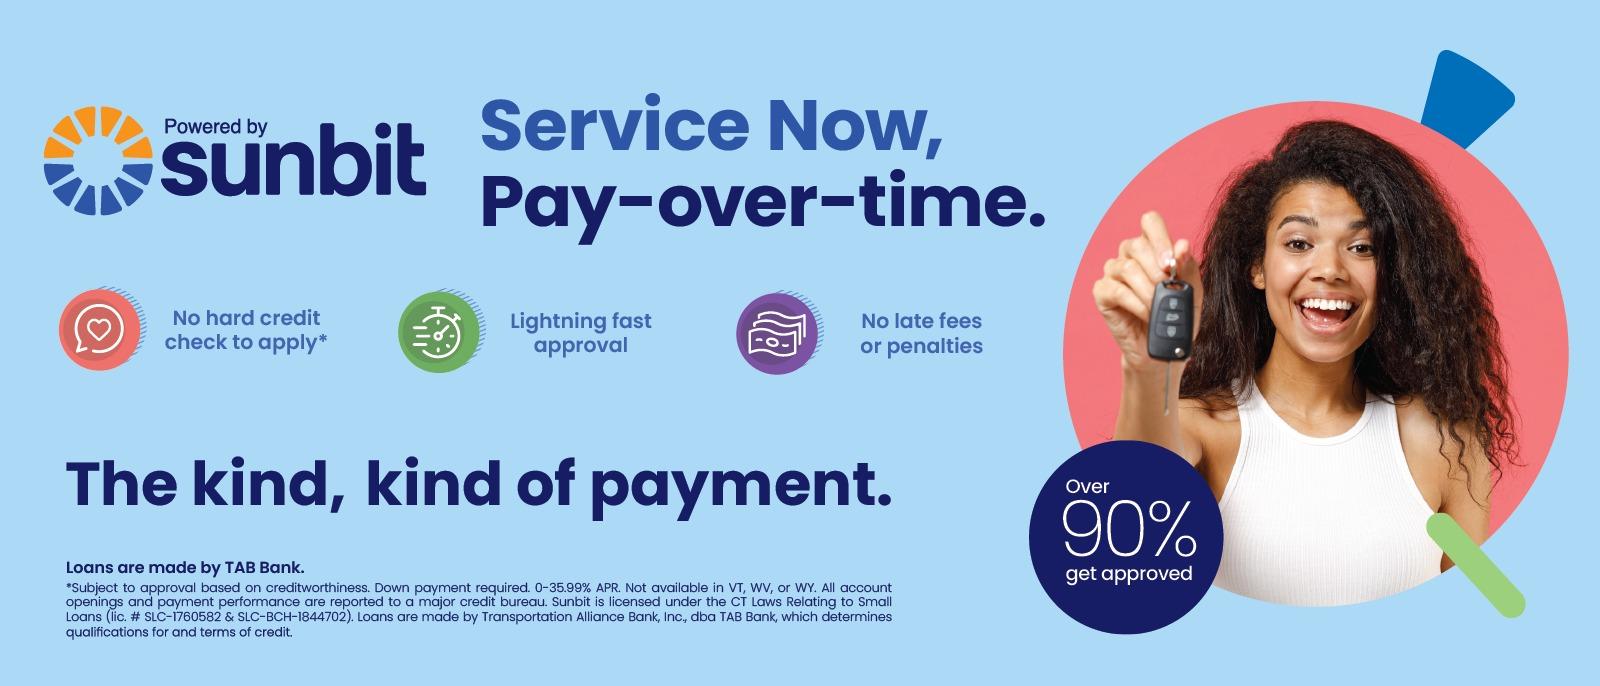 Service Now, Pay-over-time - Sunbit Financing